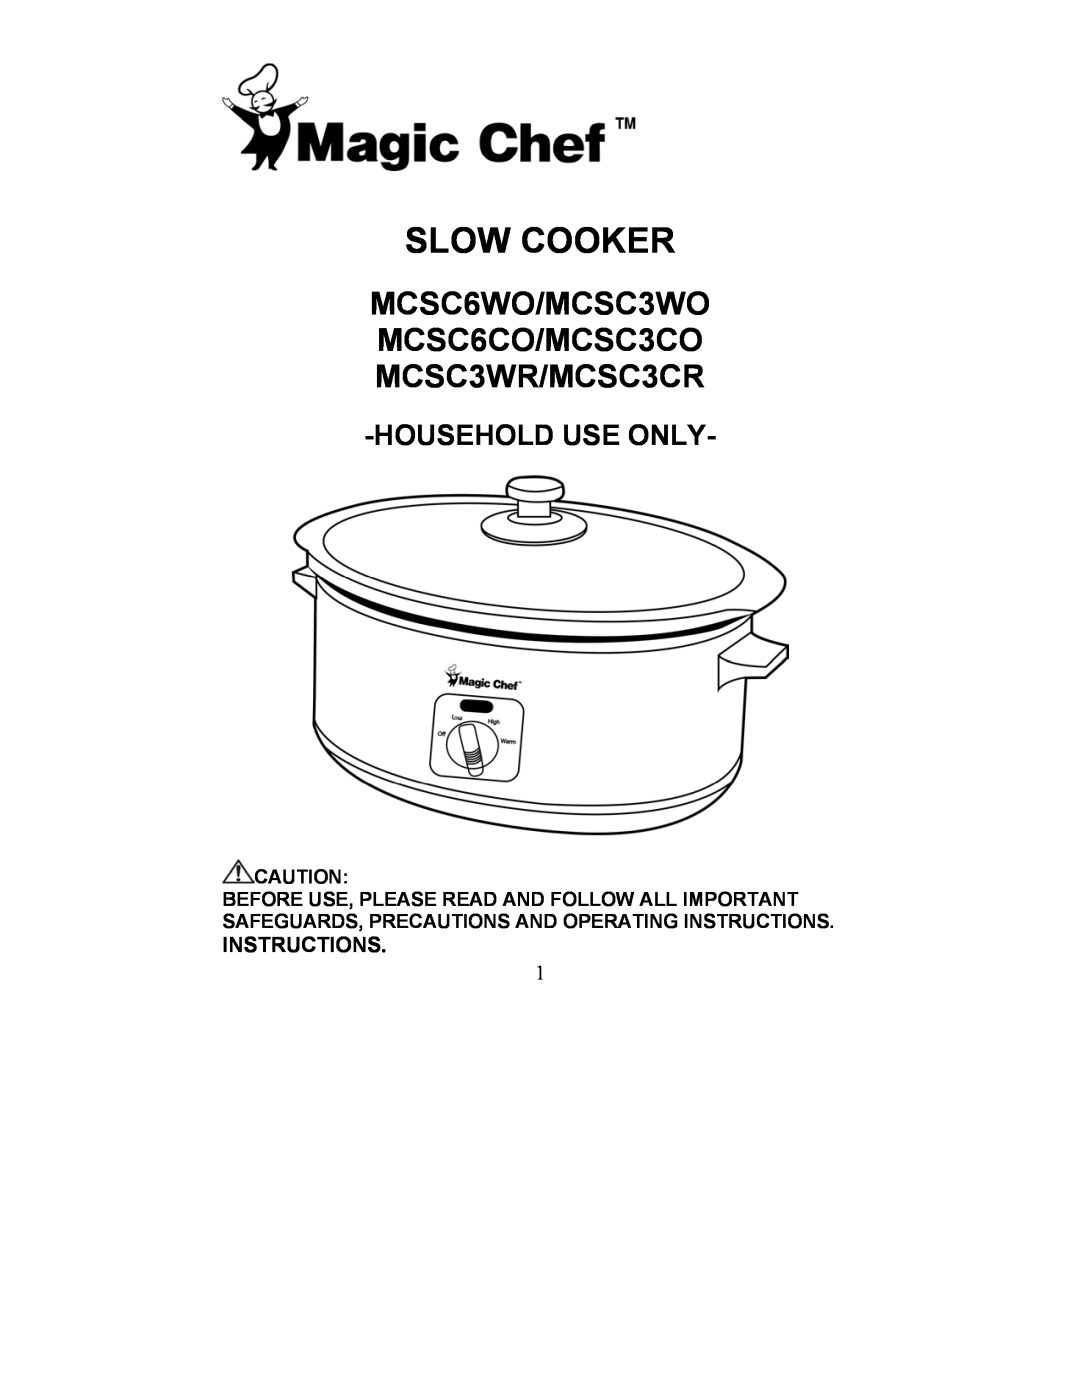 Magic Chef MCSC6COs manual Slow Cooker, MCSC6WO/MCSC3WO MCSC6CO/MCSC3CO MCSC3WR/MCSC3CR, Householduse Only, Instructions 